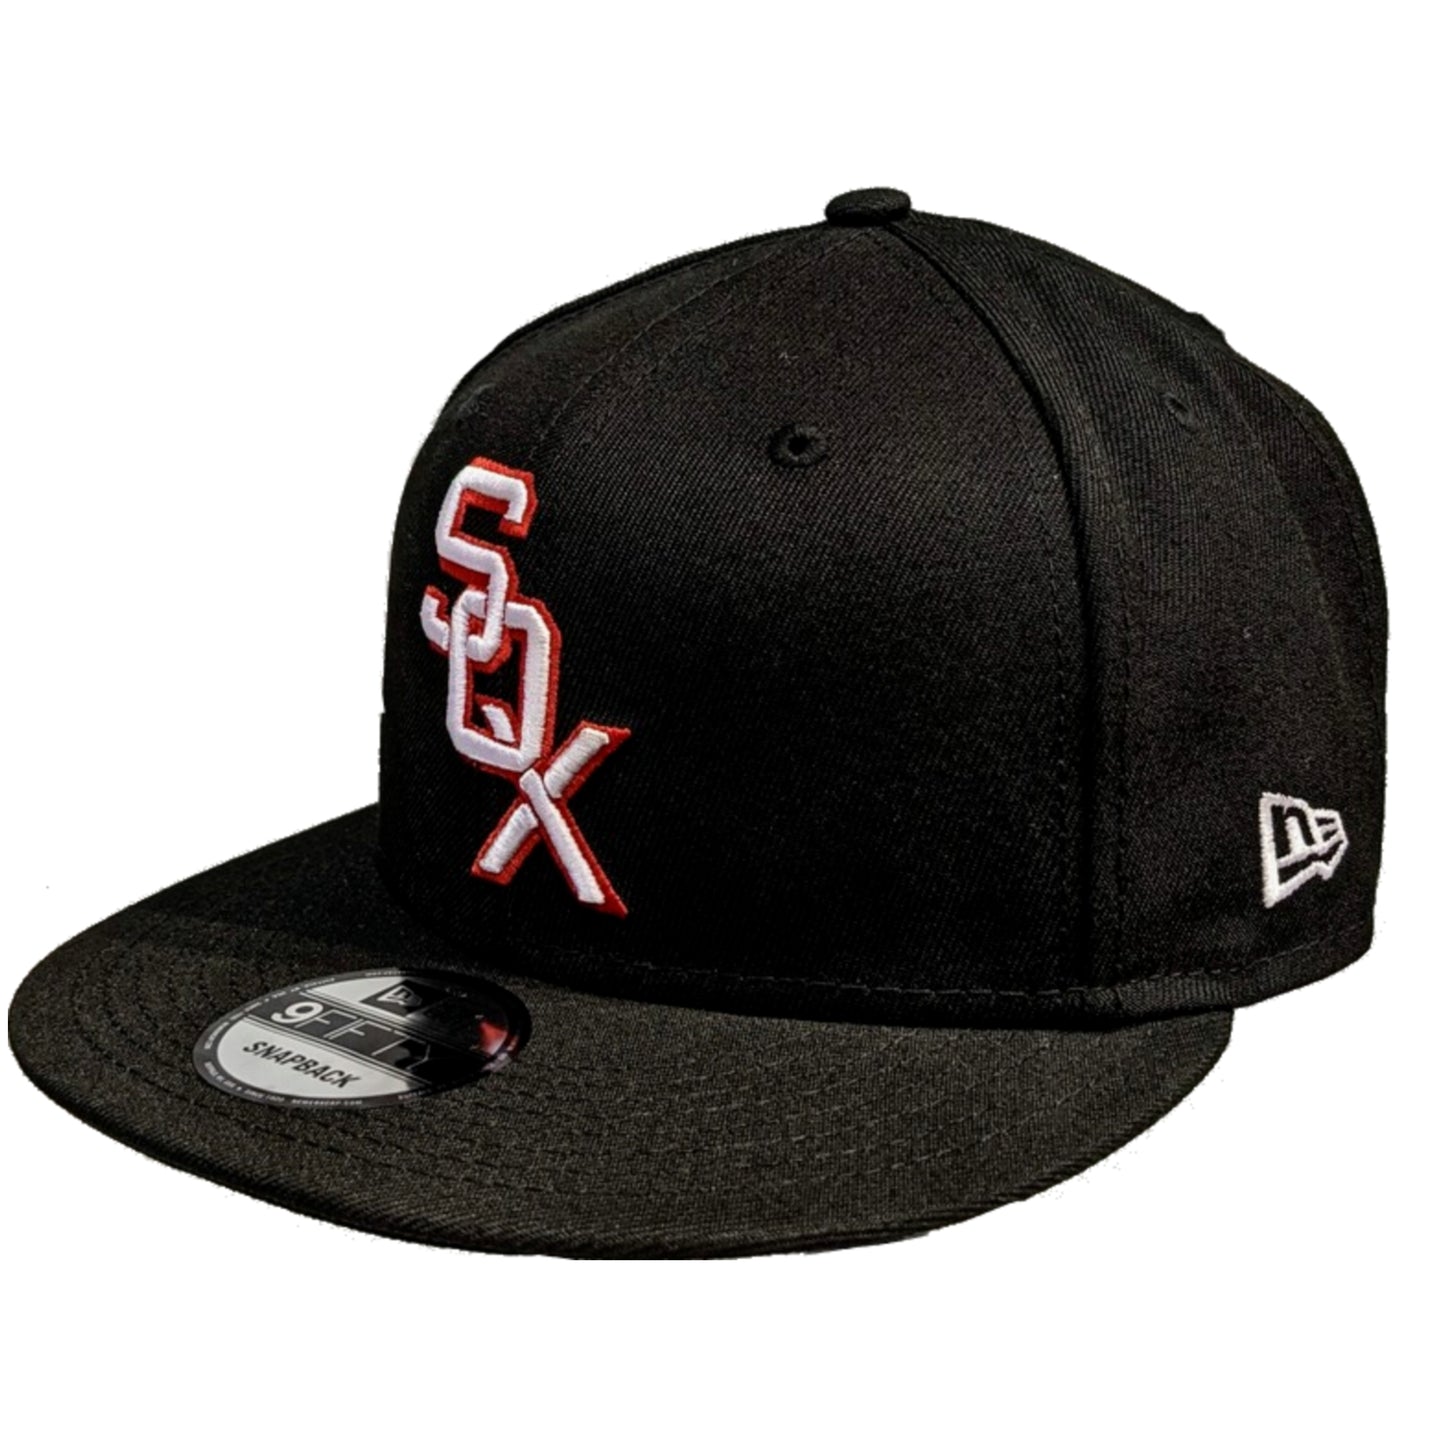 Mens Chicago White Sox New Era Black Cooperstown Collection 1959 9FIFTY Snapback Hat